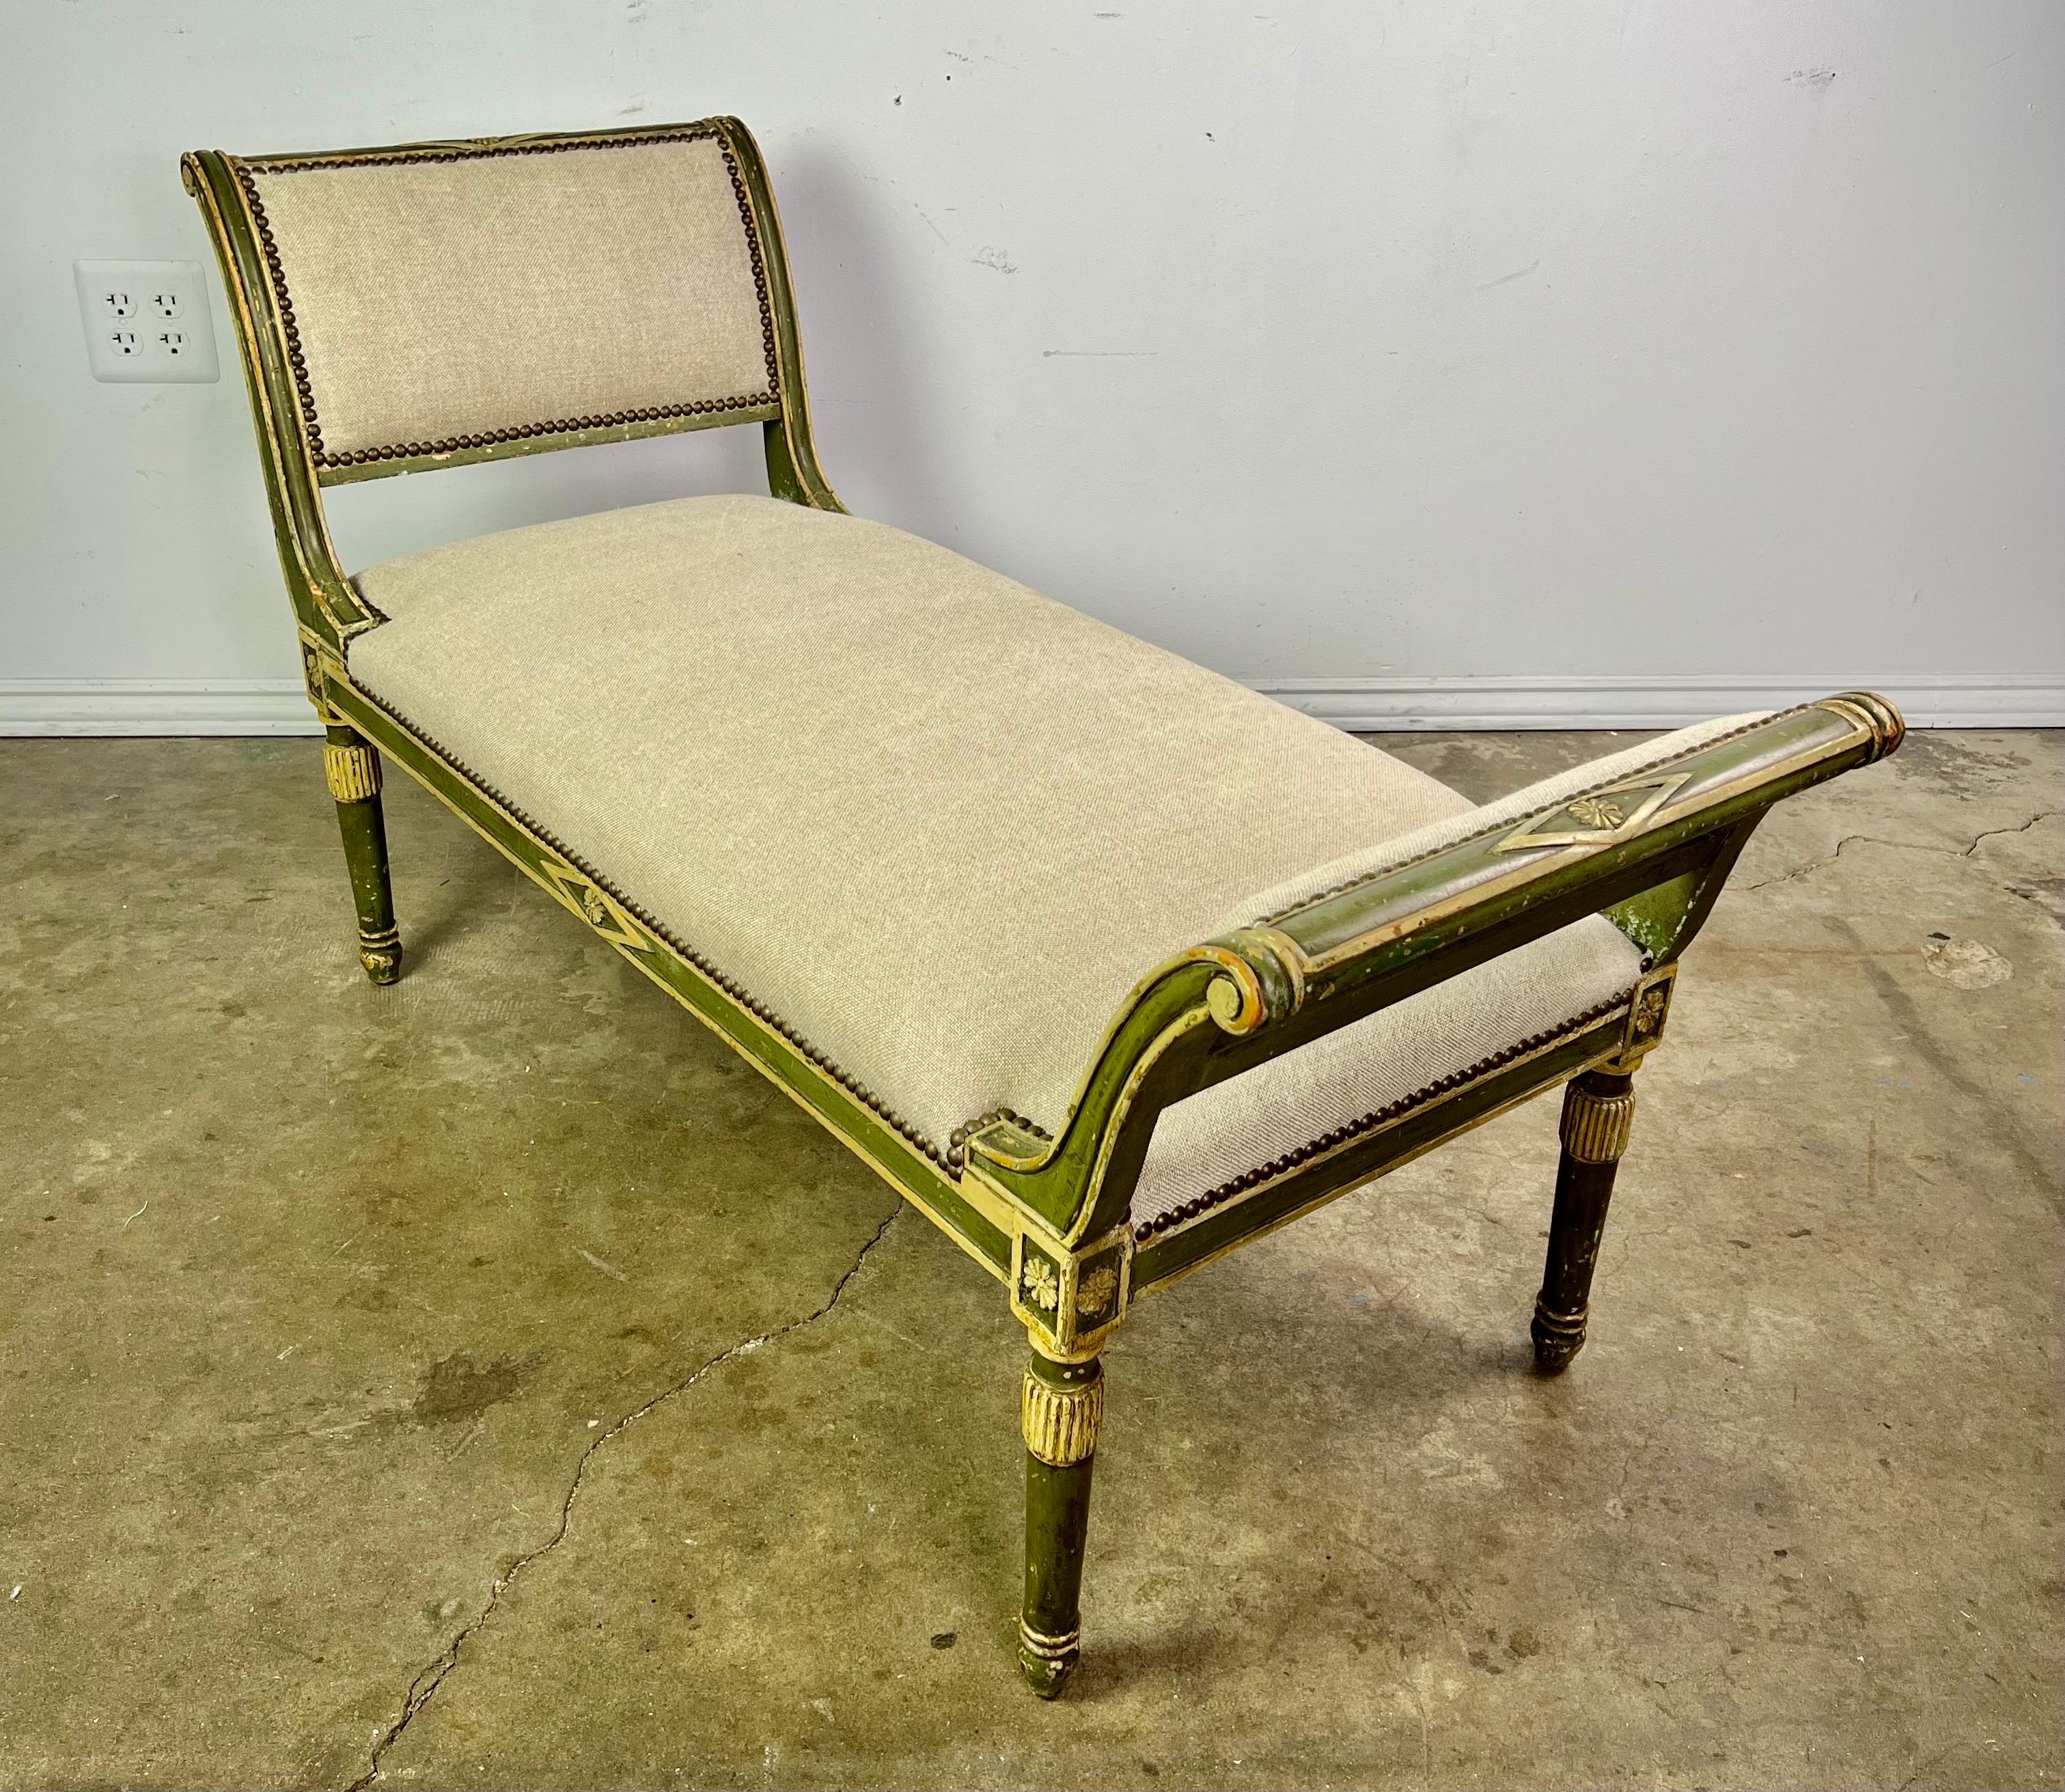 Italian painted neoclassical style bench in a green coloration with gold details throughout. The bench is newly upholstered in a washed Belgium linen with brass nailhead trim detail.